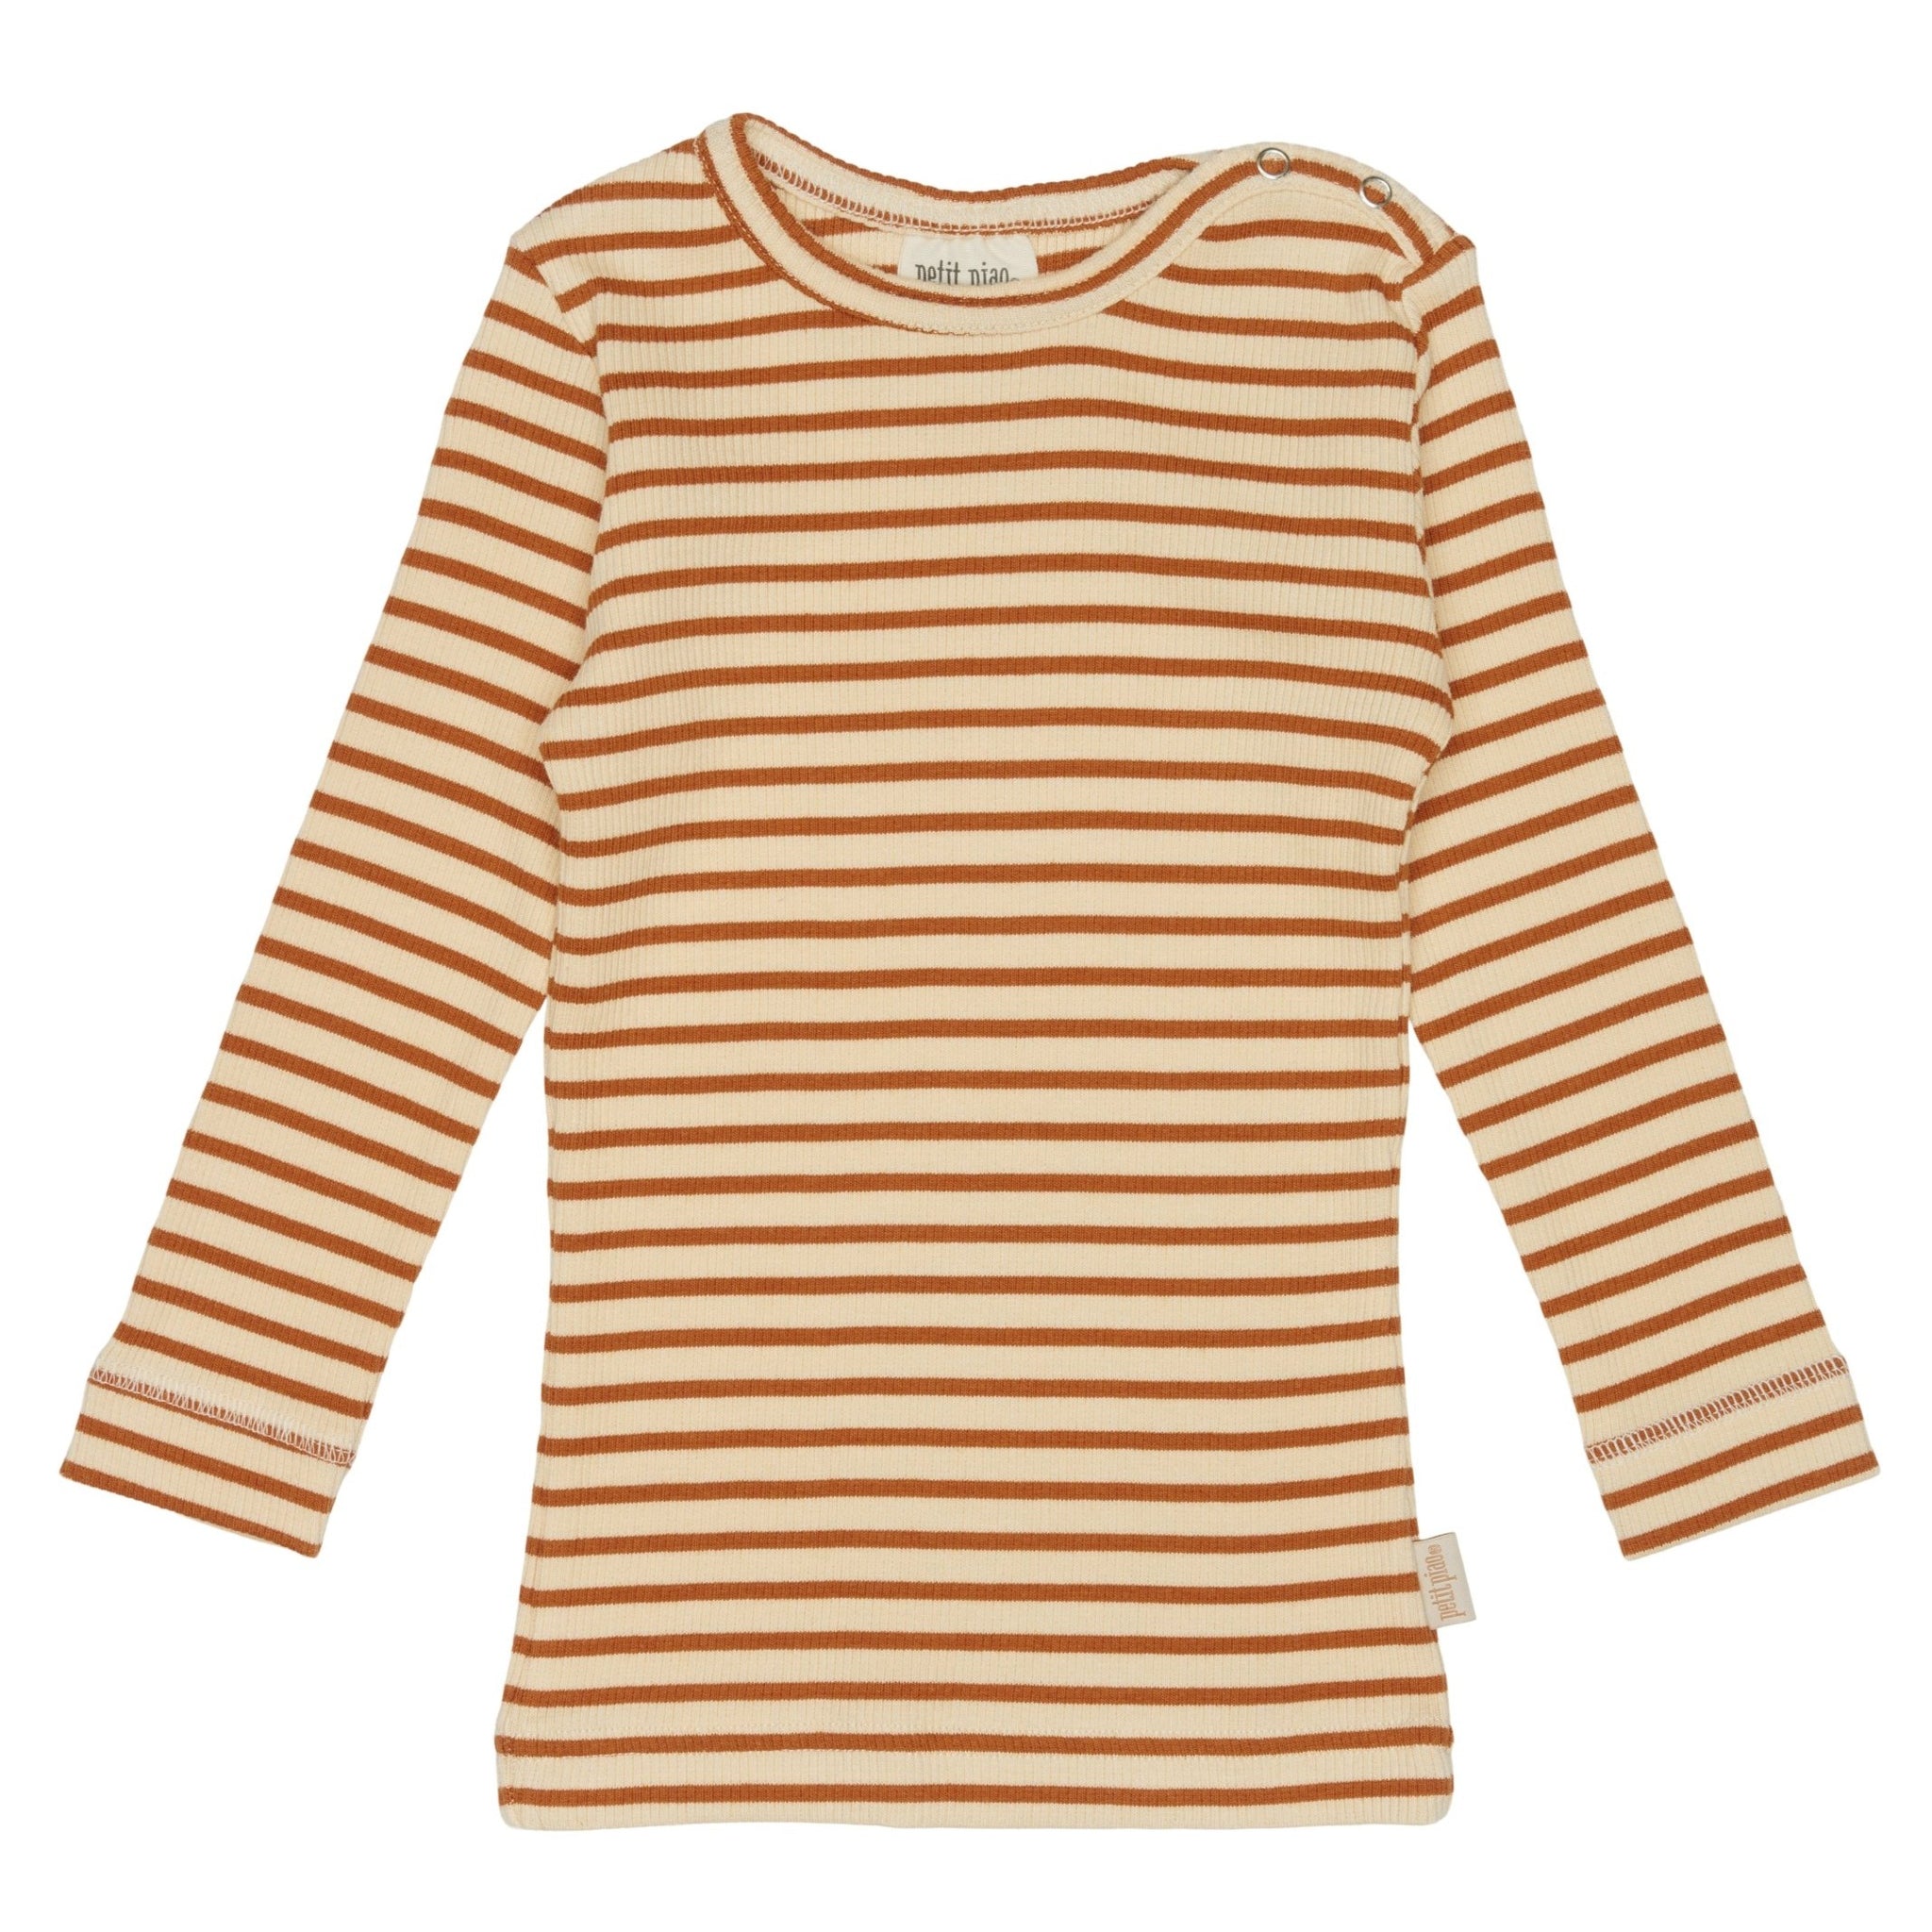 Petit Piao - Modal T-shirt Striped LS - Curry / Cream